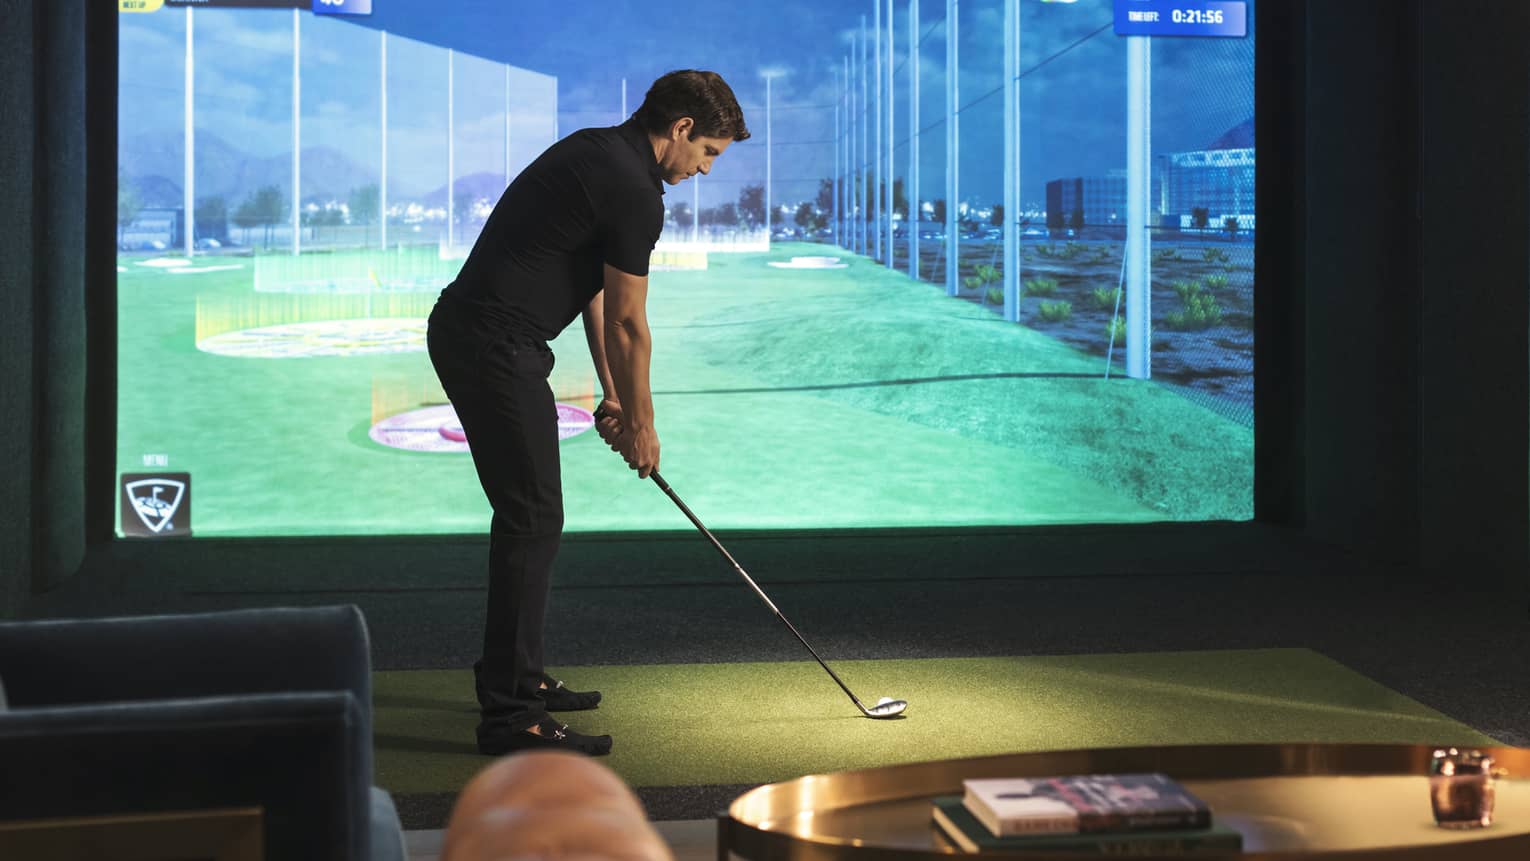 Man with golf club stands in front of screen showing Virtual Fairway